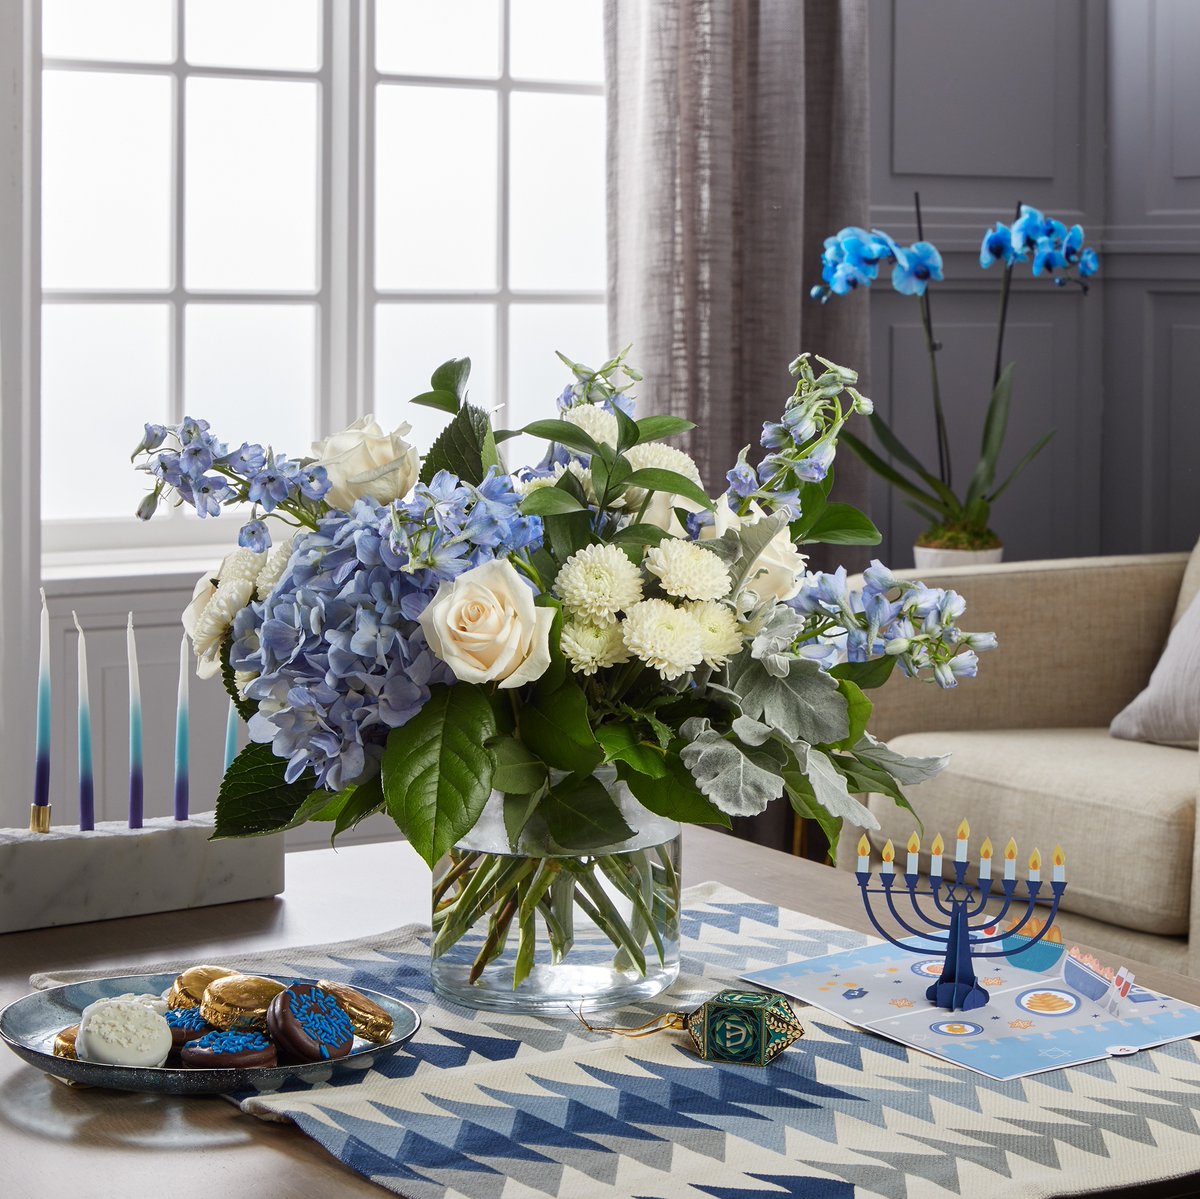 he Festival of Lights is almost here 🕎 We have the warmest florals and gifts to make your Hanukkah celebration special this season! l8r.it/mbtE